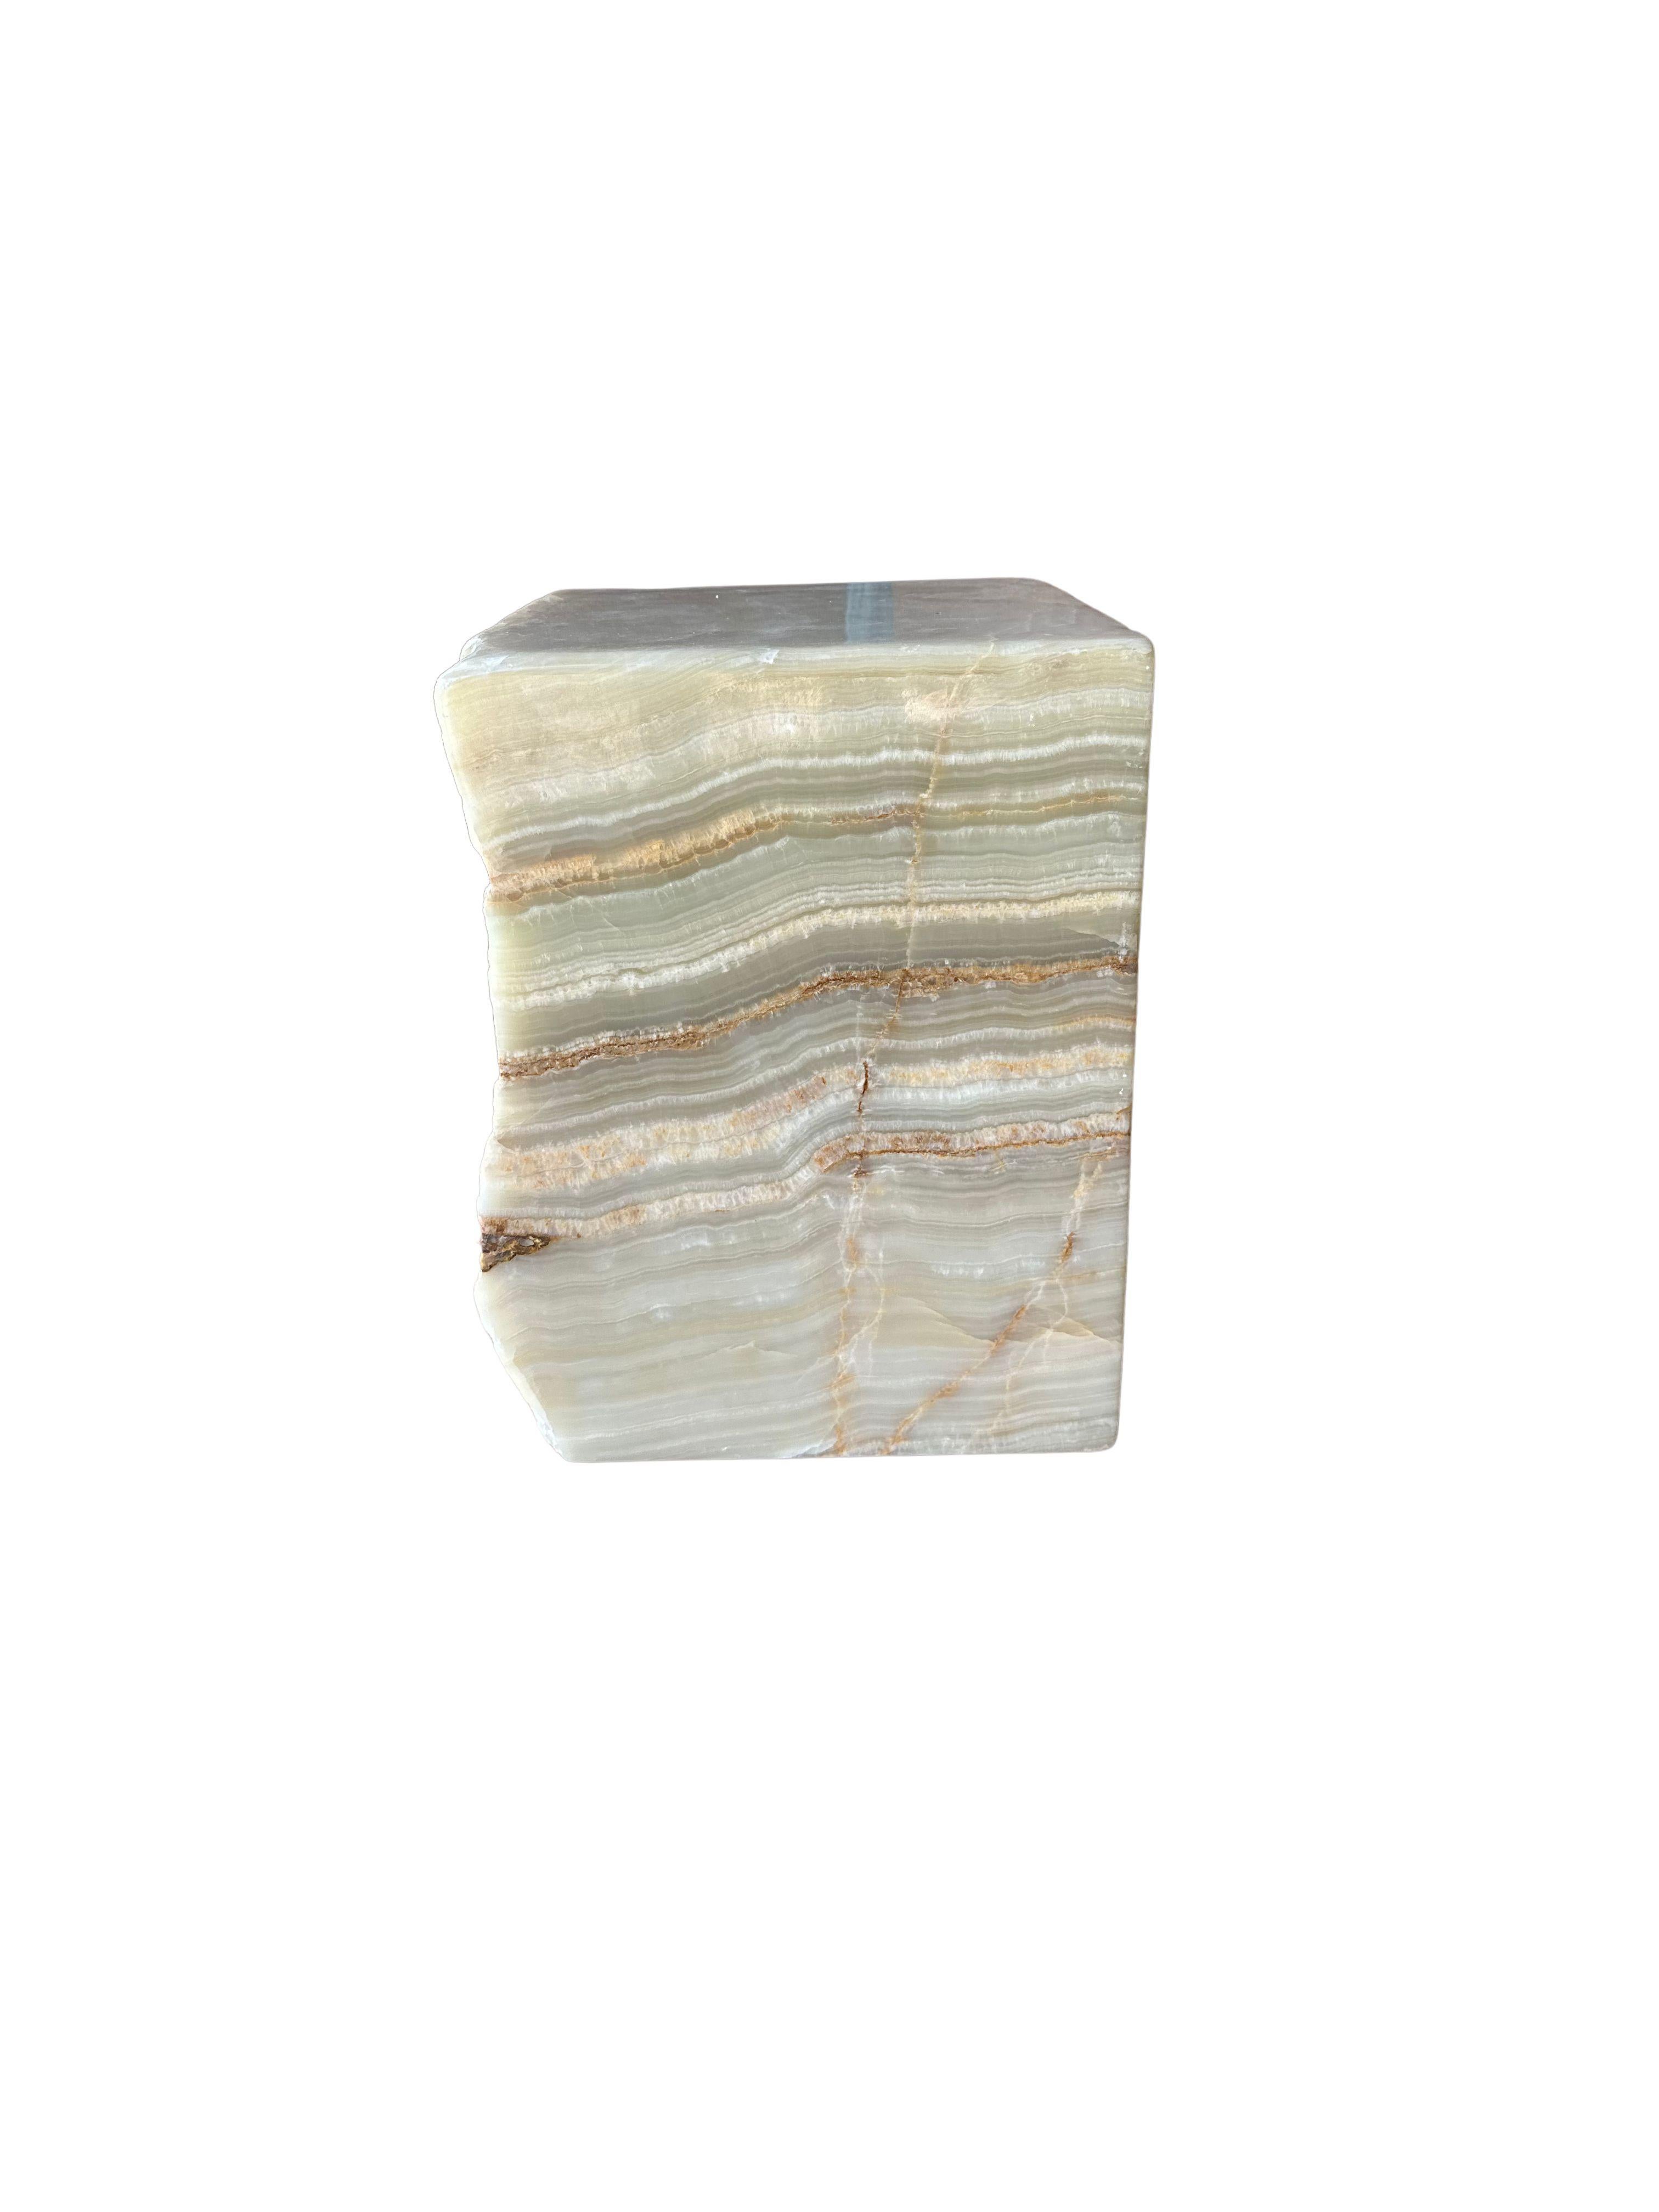 A Jupiter onyx solid marble block which serves as a wonderful side table or pedestal. Sourced on the island of Sumatra with a jade green undertone, this raw and organic object features a stunning mix of textures and shades. The mix of smooth and